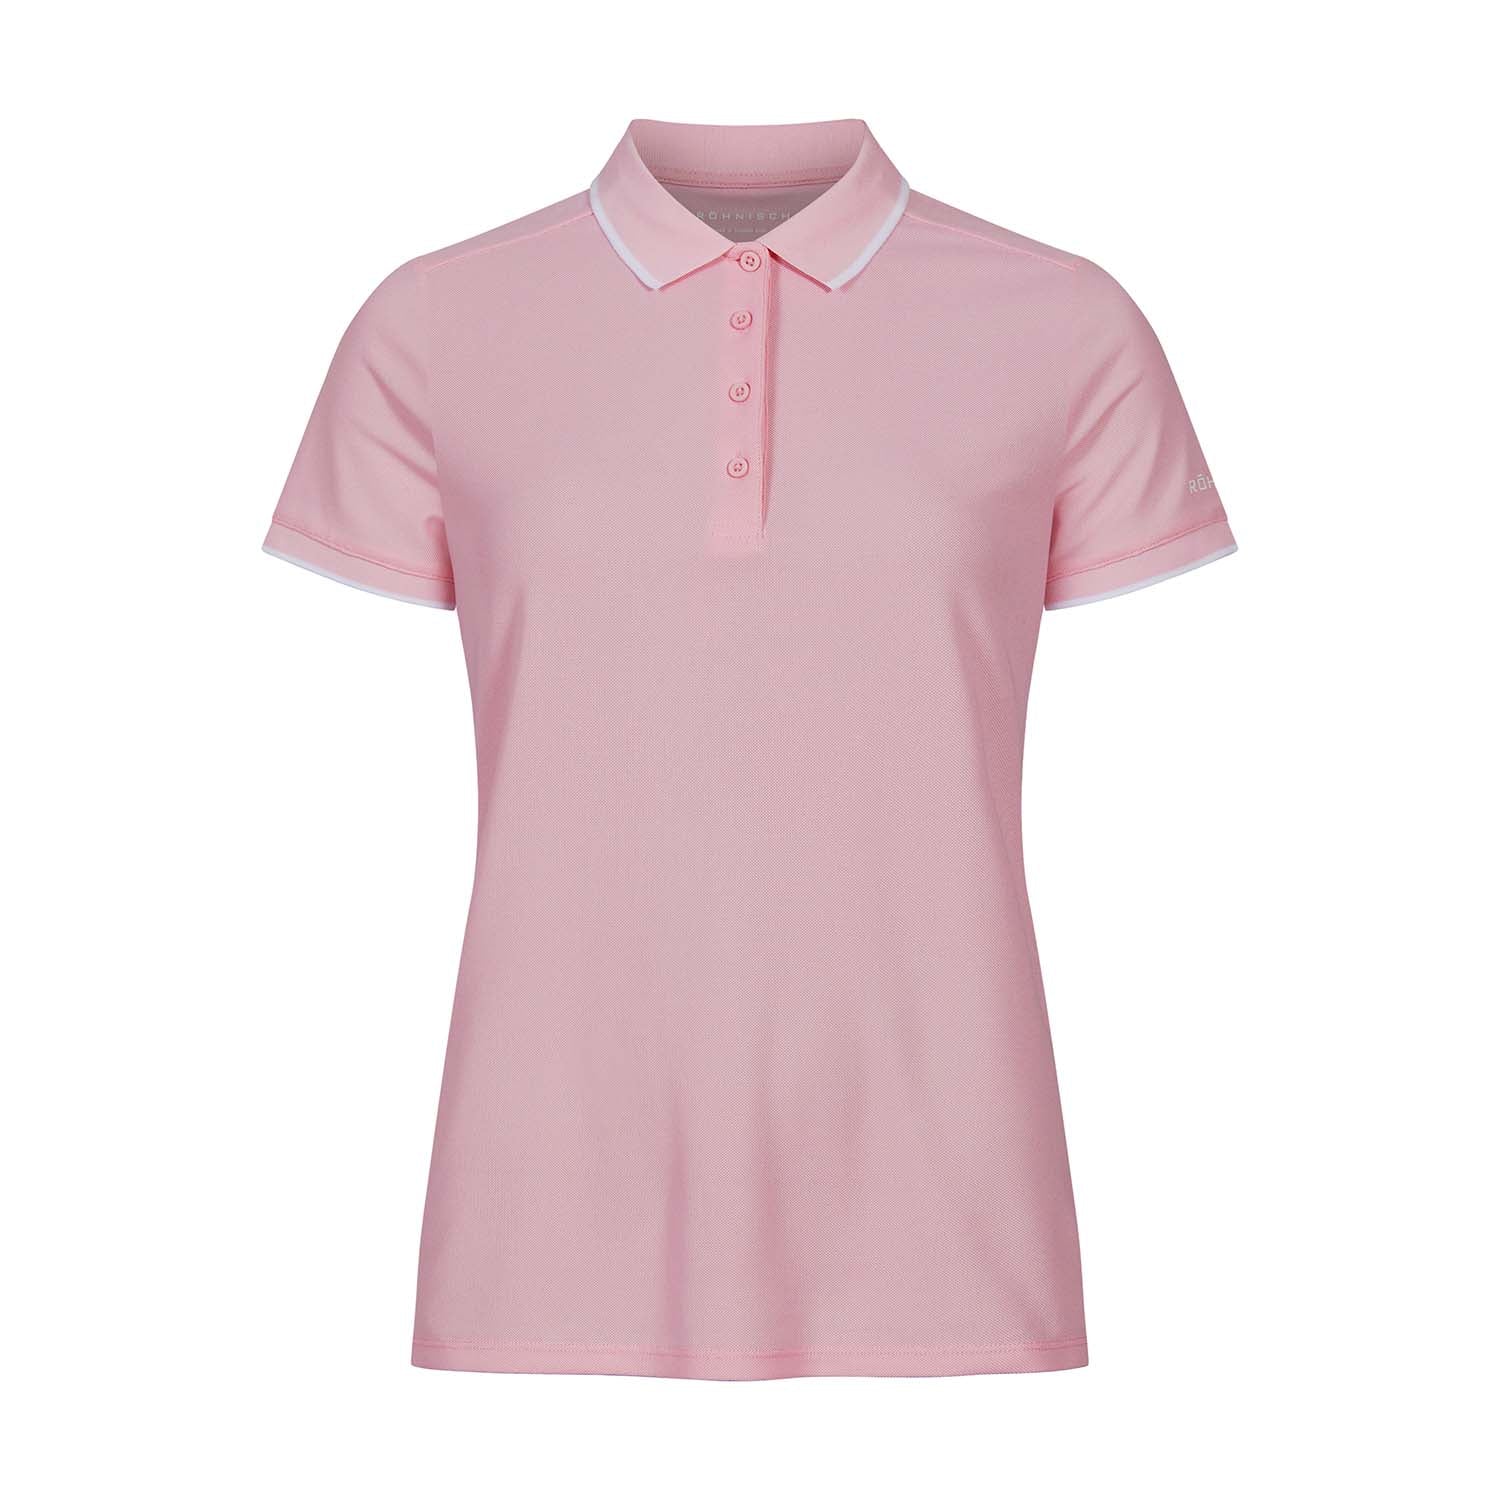 Rohnisch Ladies Classic Polo Shirt with Contrast Trim in Orchid Pink 